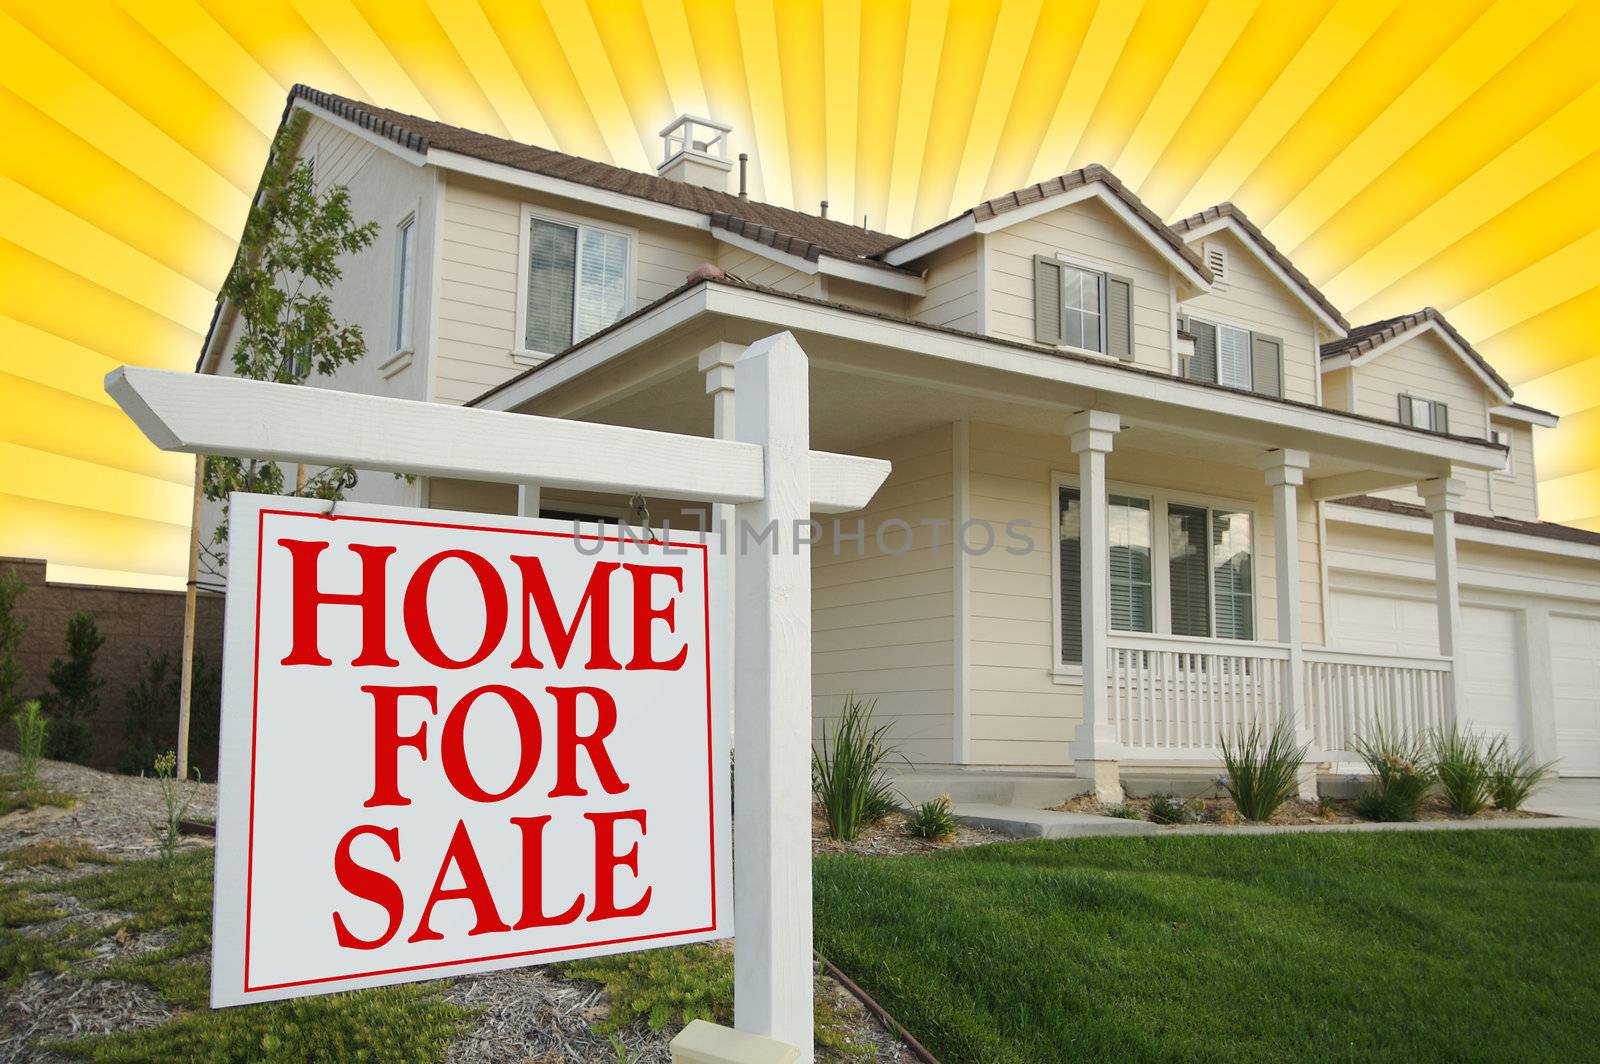 Home For Sale sign with Yellow Star-burst Background in front of new house.